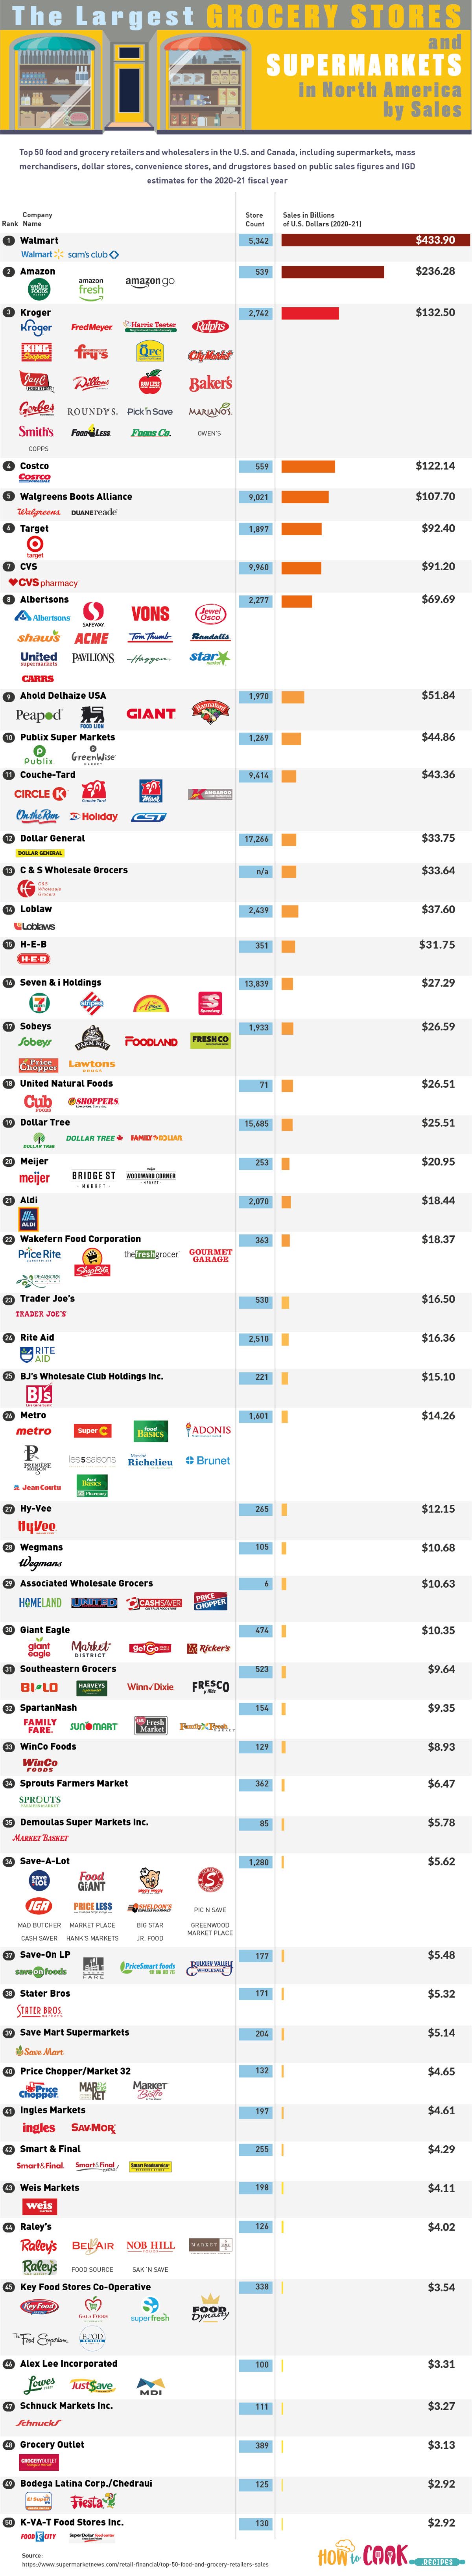 The Largest Grocery Stores and Supermarkets in North America by Sales #Infographic